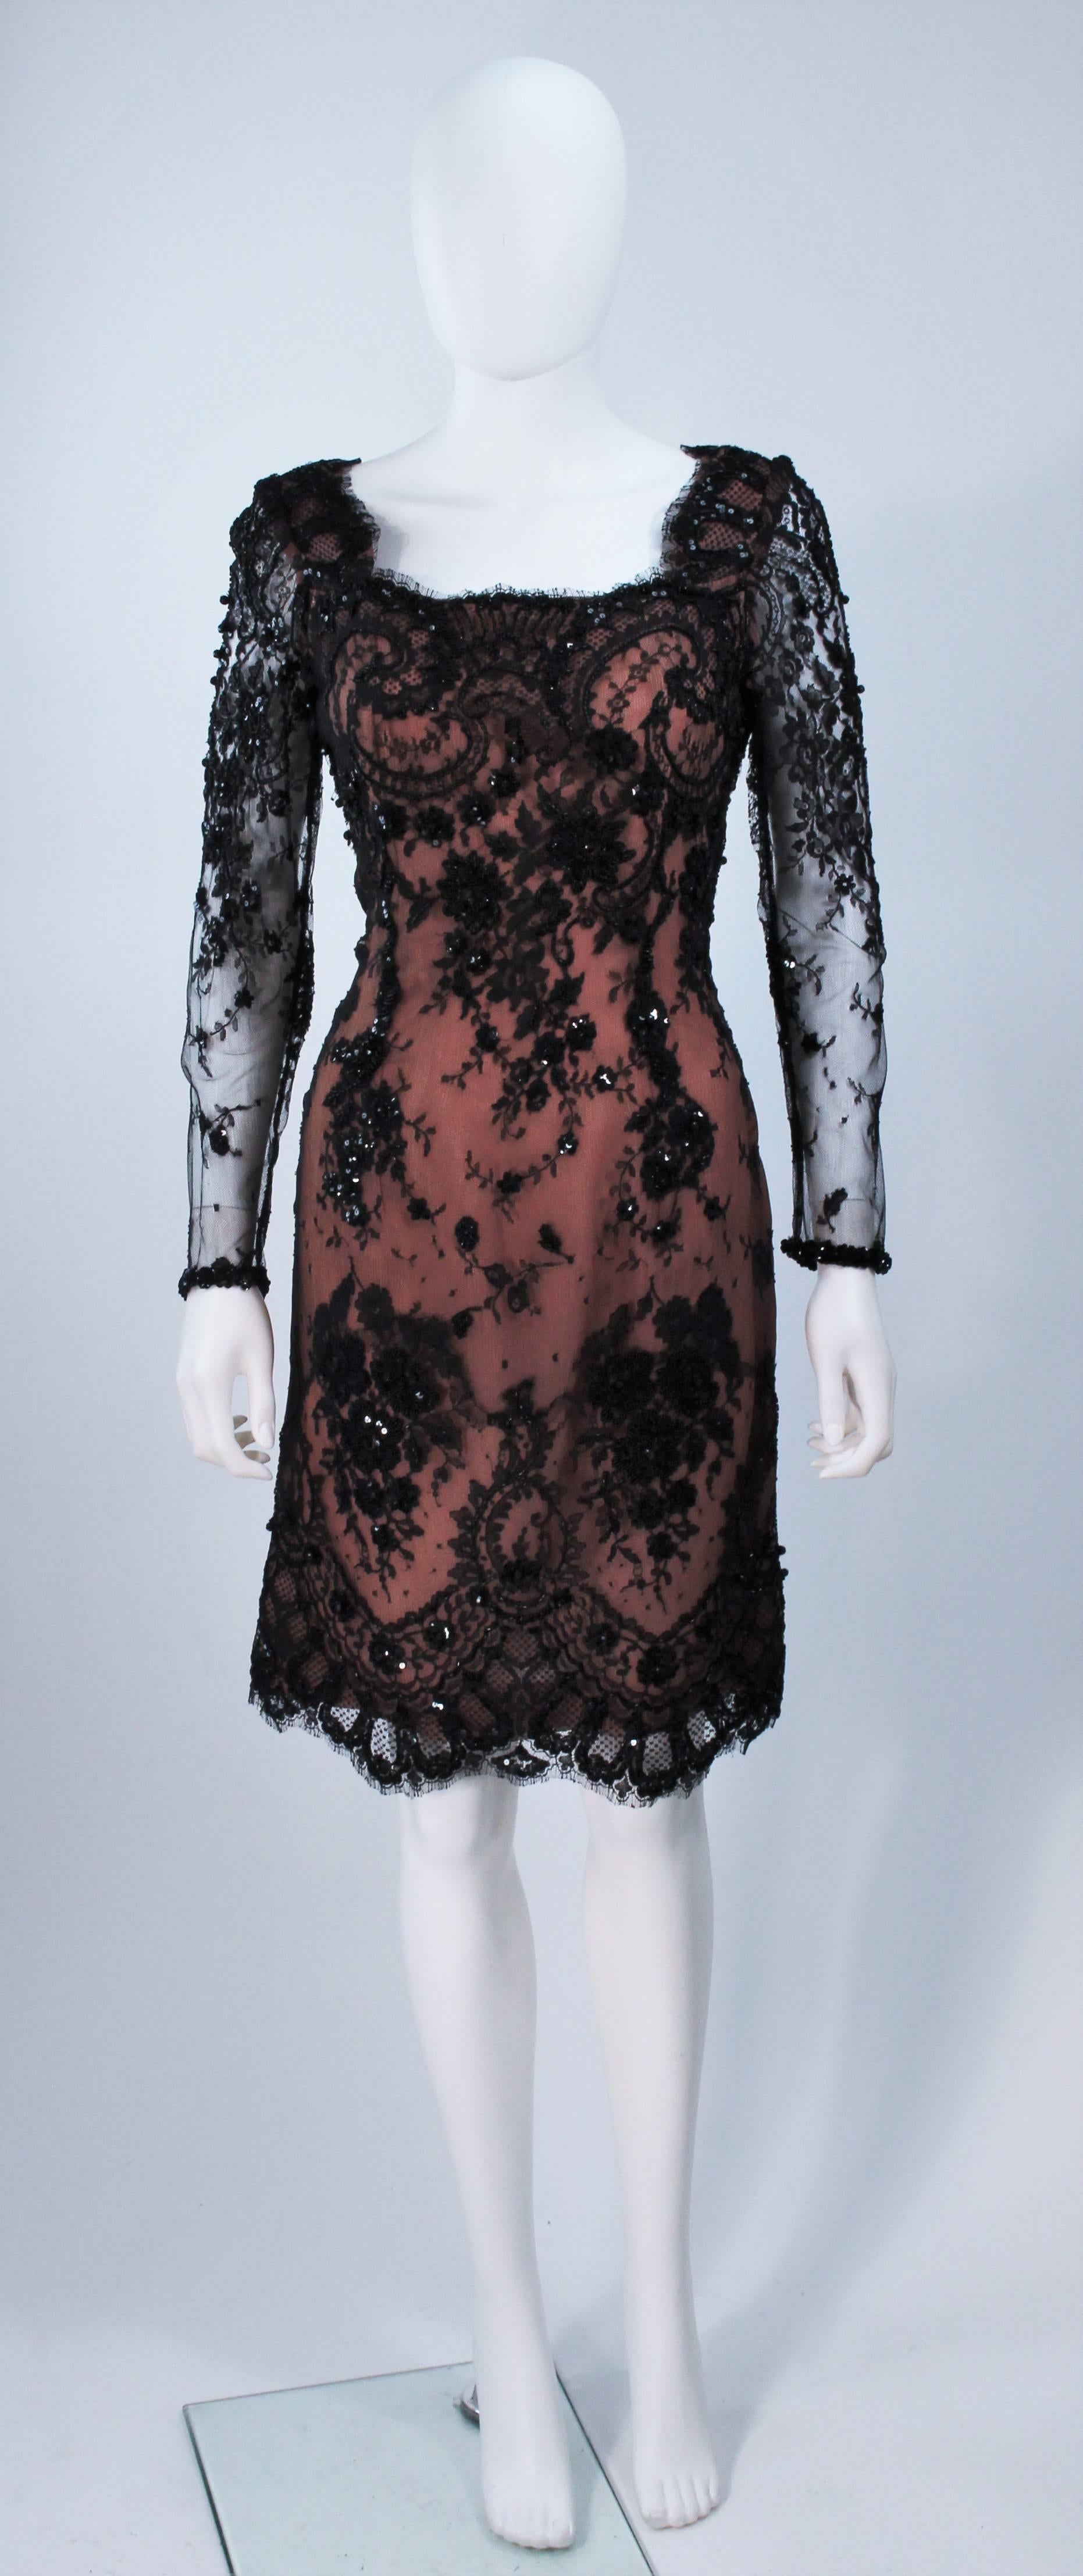  This Fe Zandi  cocktail dress is composed of black lace with a nude tone silk base. The lace features beaded applique with sequins and a scalloped edge. There are sheer sleeve, with a center back zipper closure. In excellent vintage condition. 

